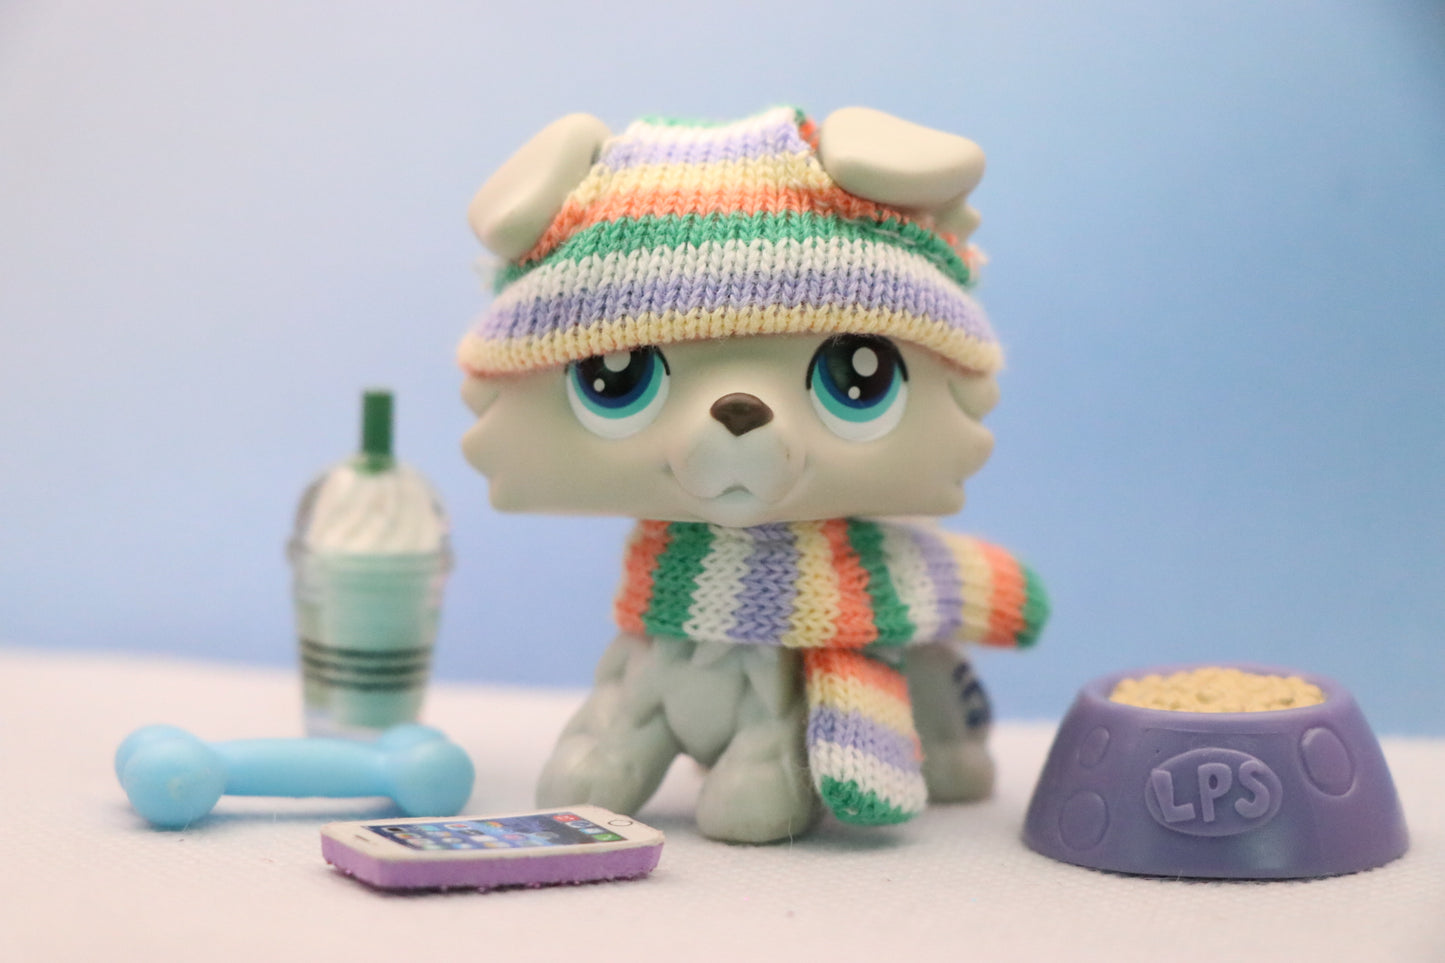 Littlest Pet Shop lps Collie 363 with lps Accessories Knitted Beanie Outfit